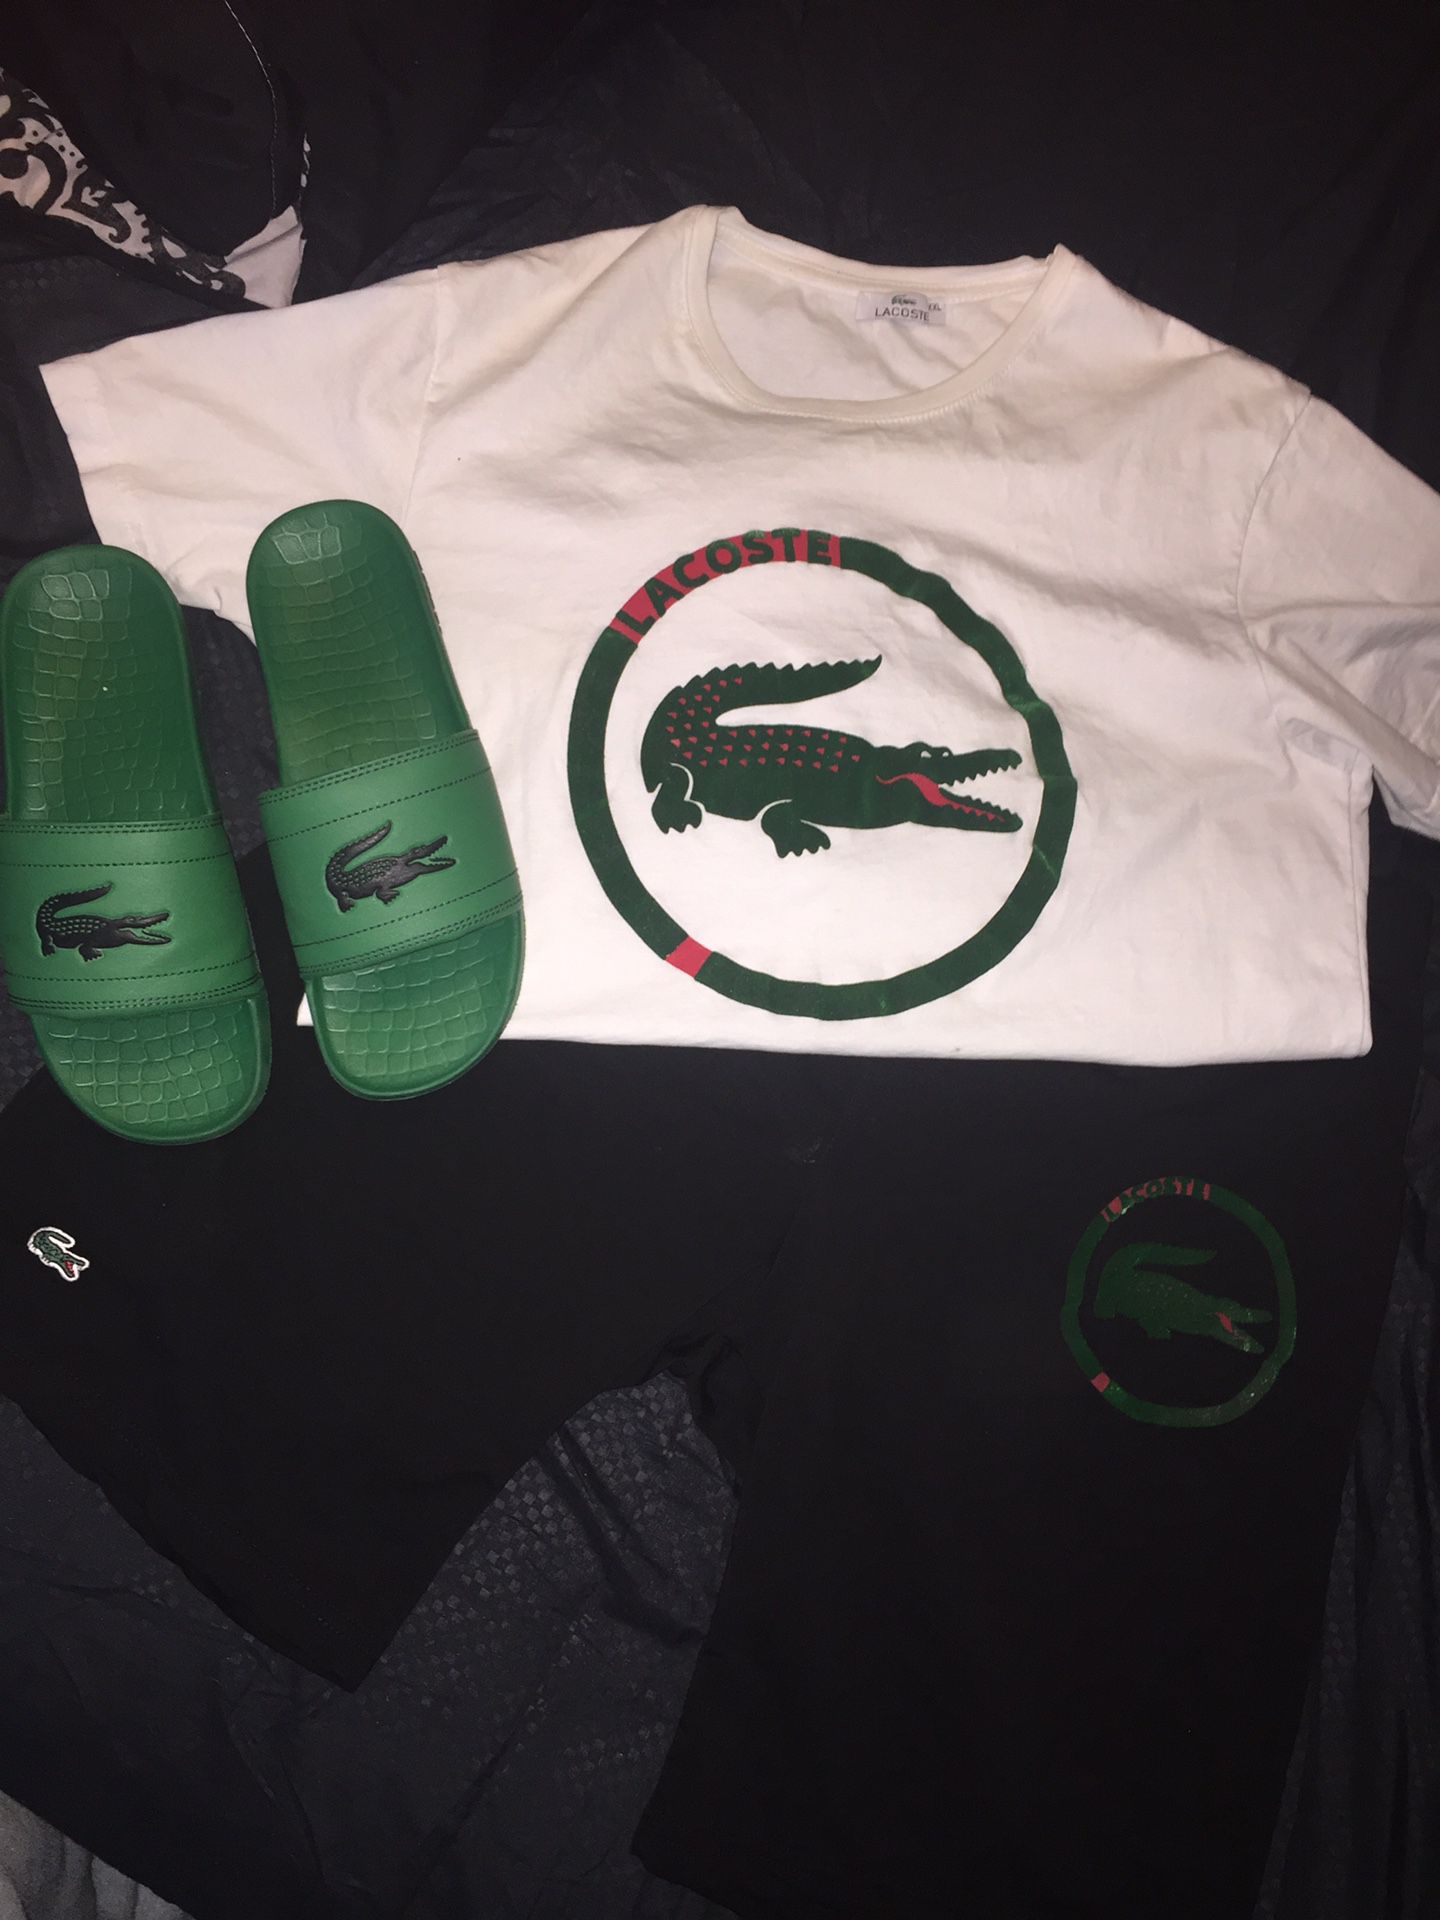 Lacoste OUTFIT!!!! Sandals are not included